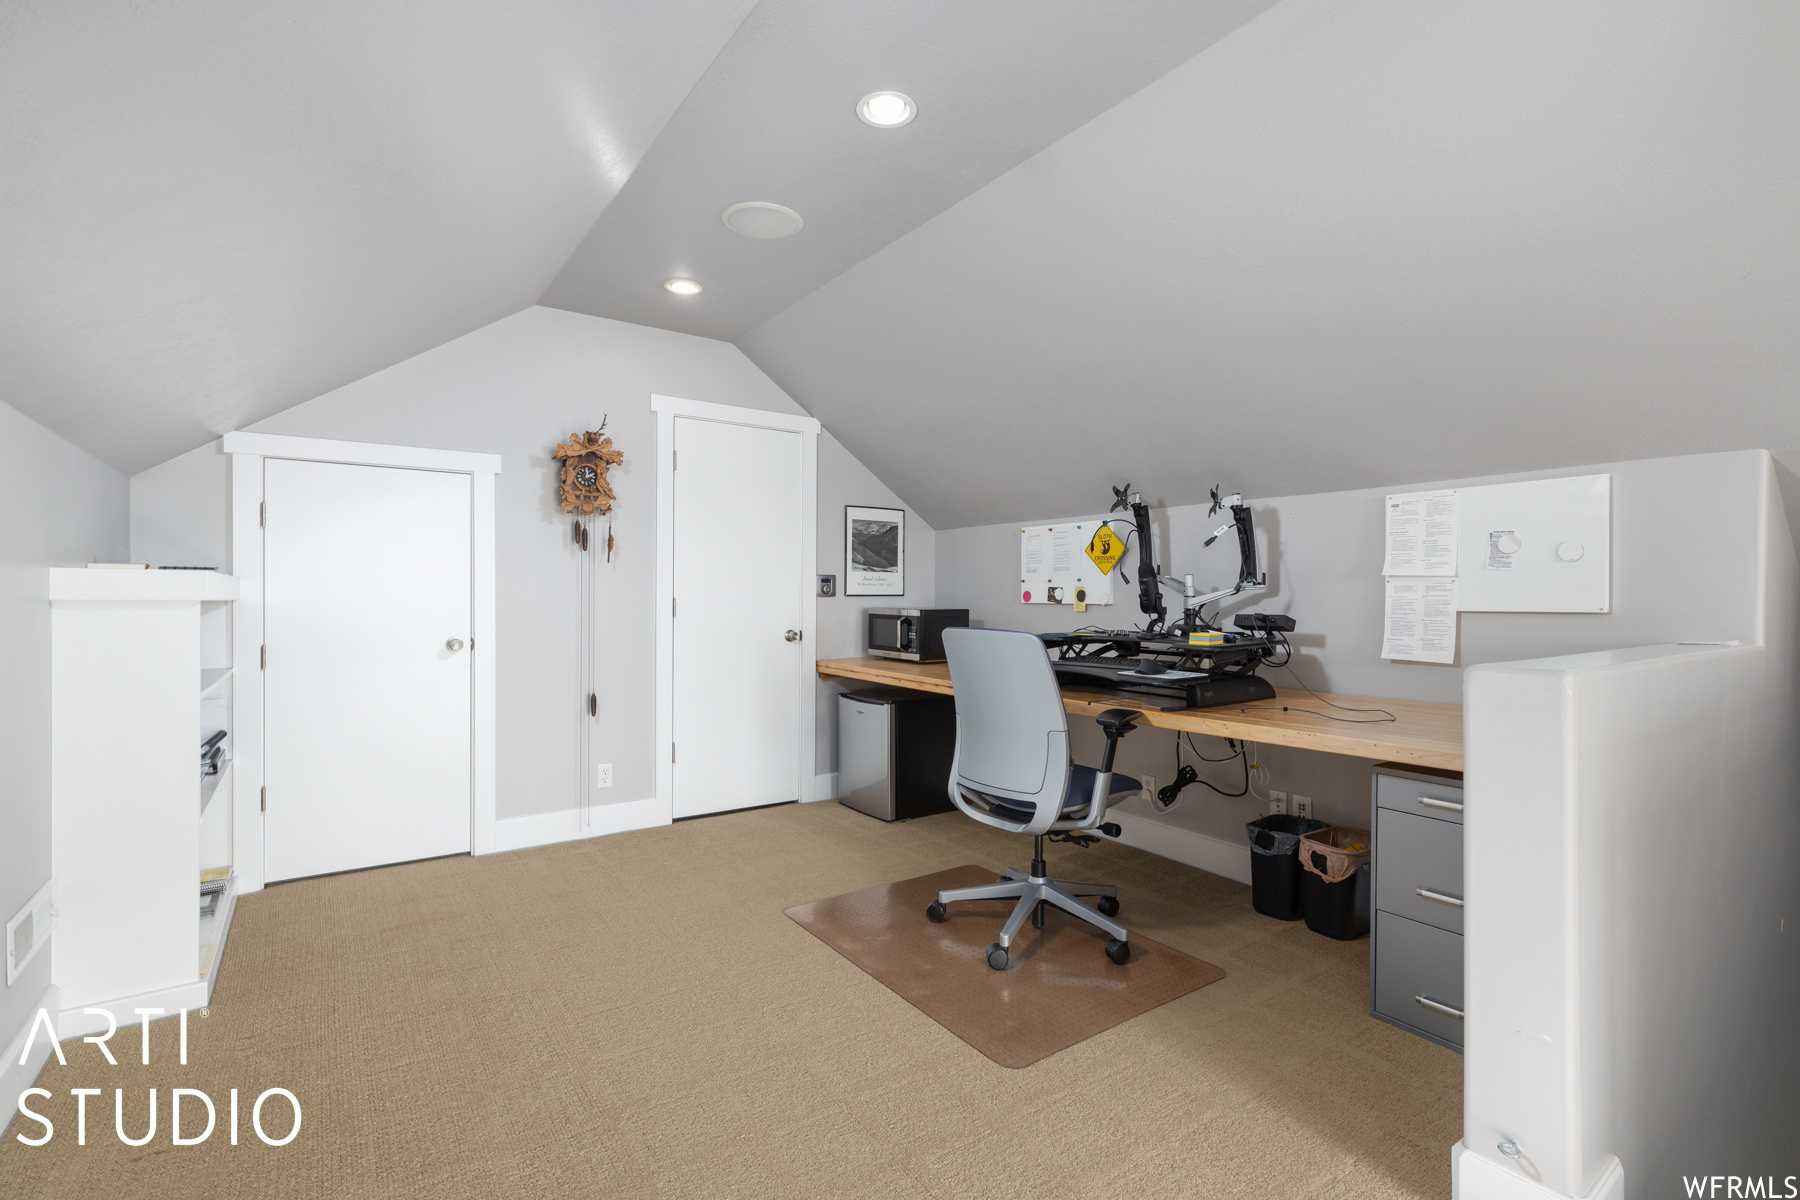 Detached Garage carpeted office space with lofted ceiling